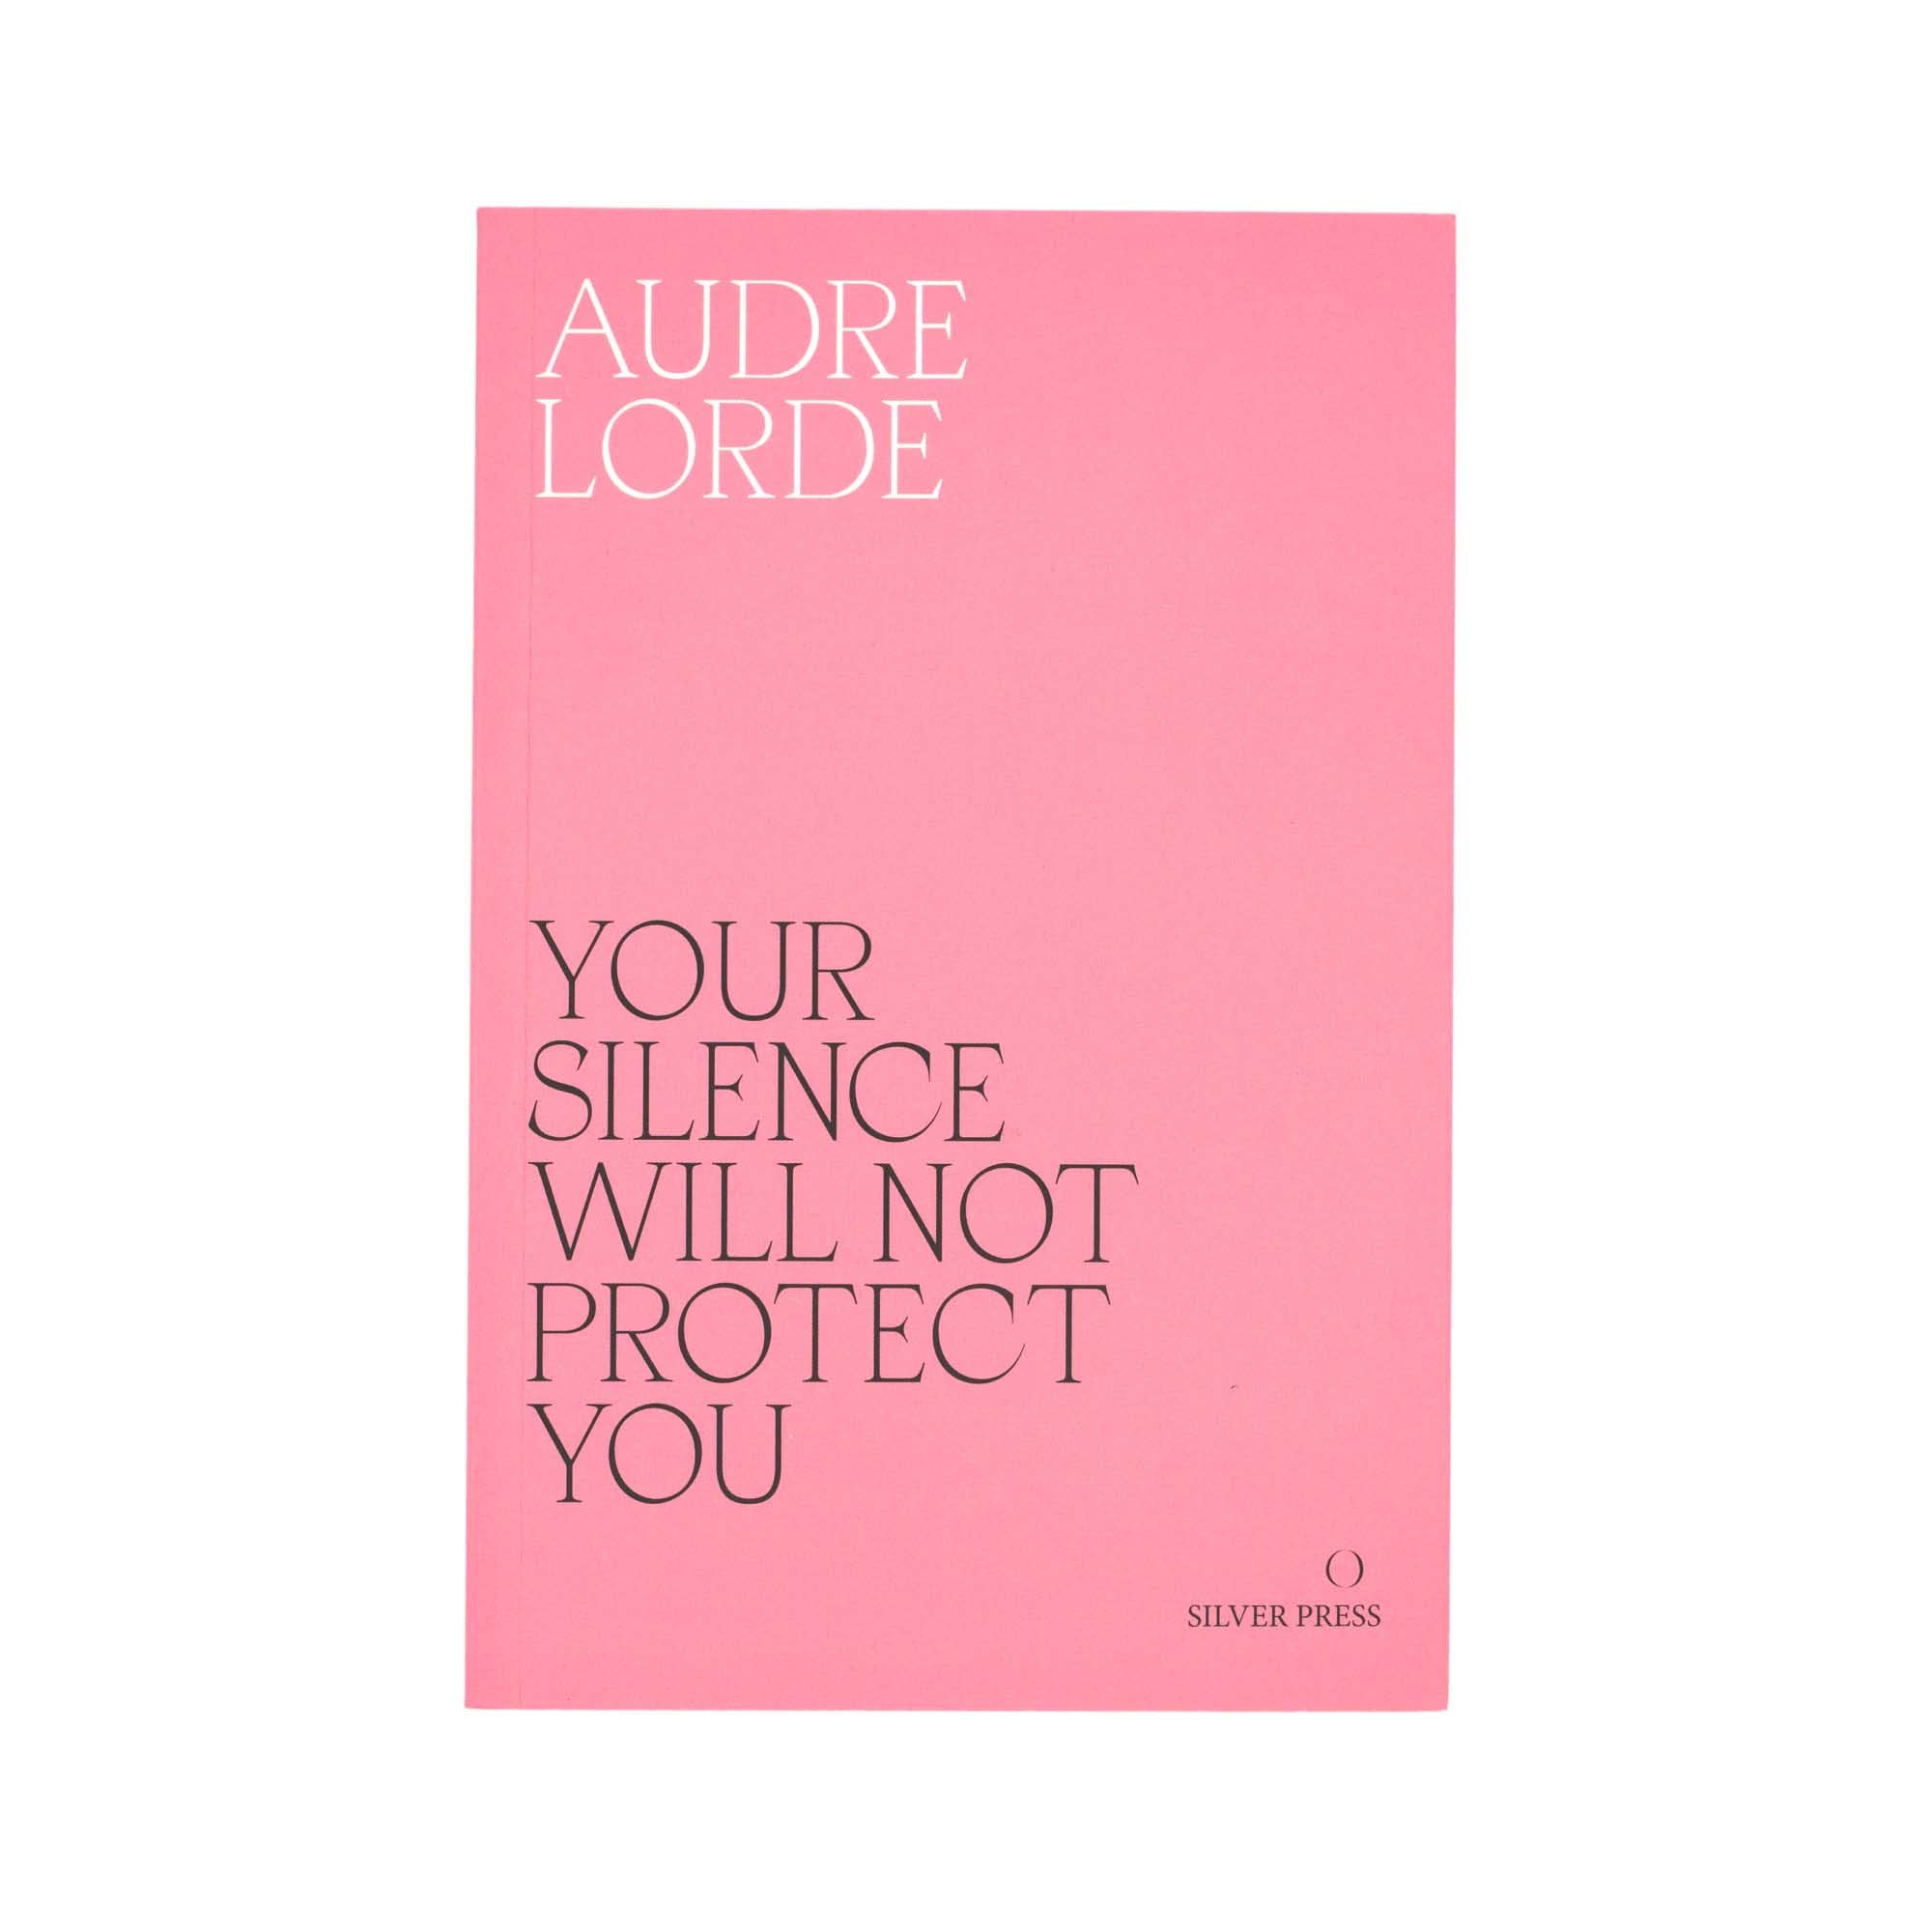 Your Silence Will Not Protect You - Audre Lorde